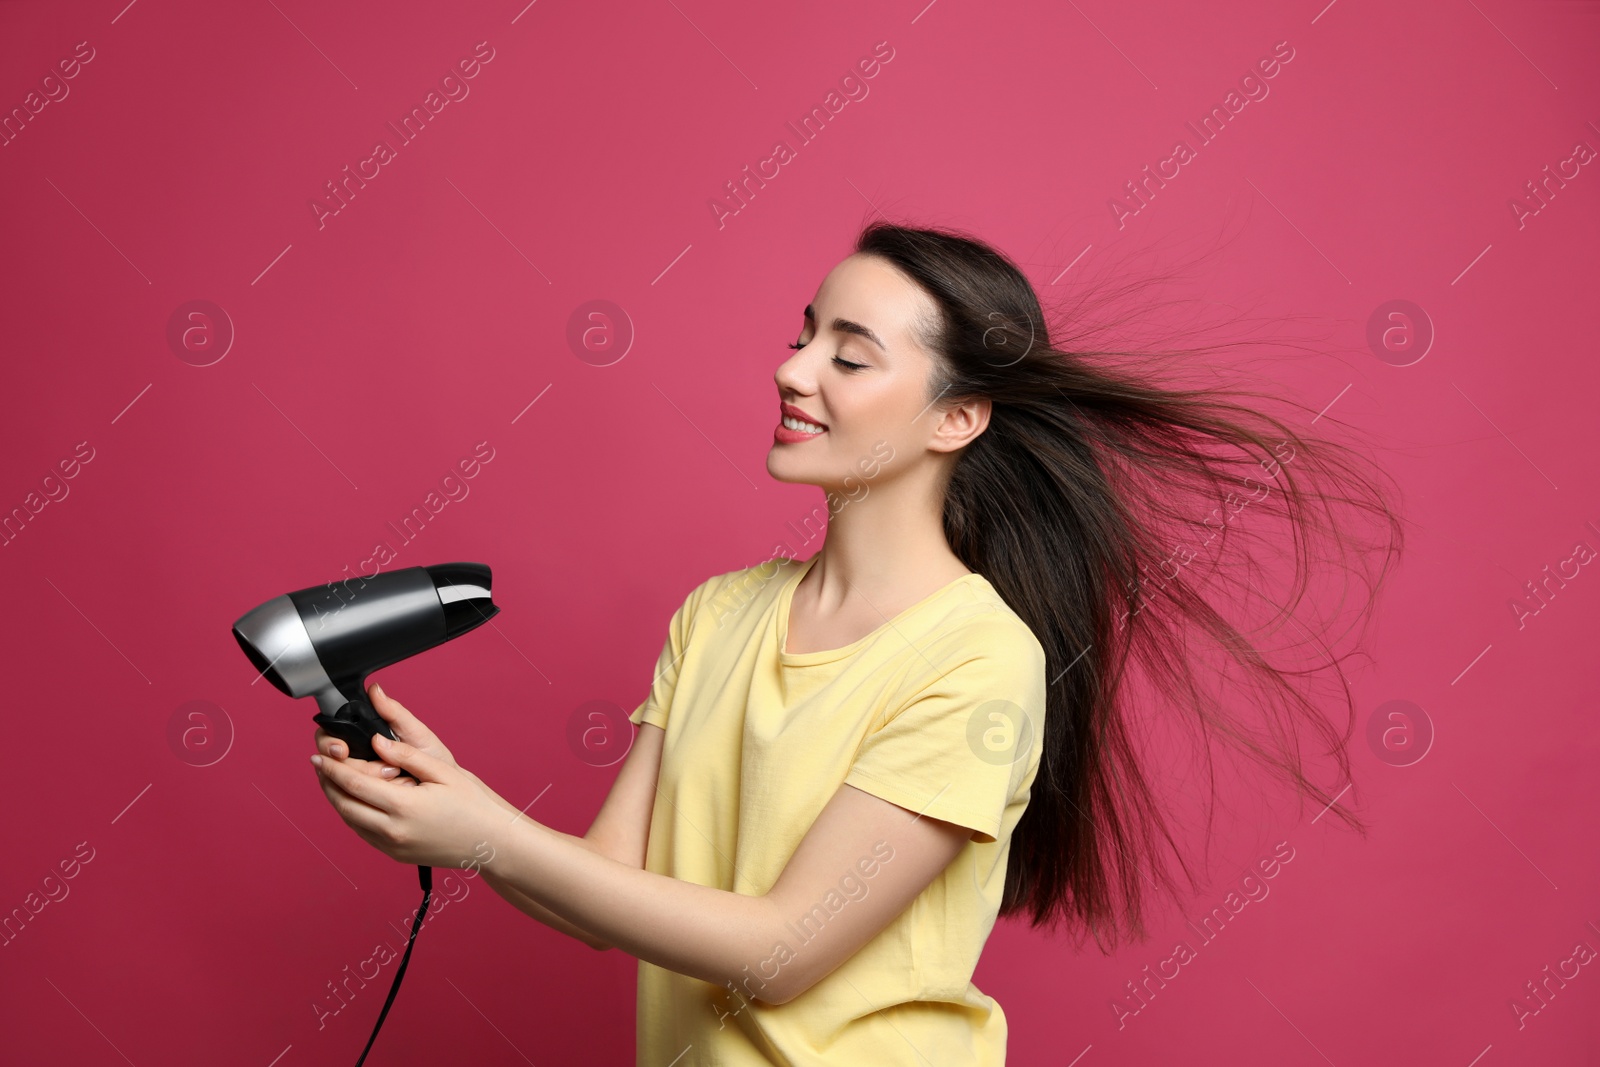 Photo of Beautiful young woman using hair dryer on pink background